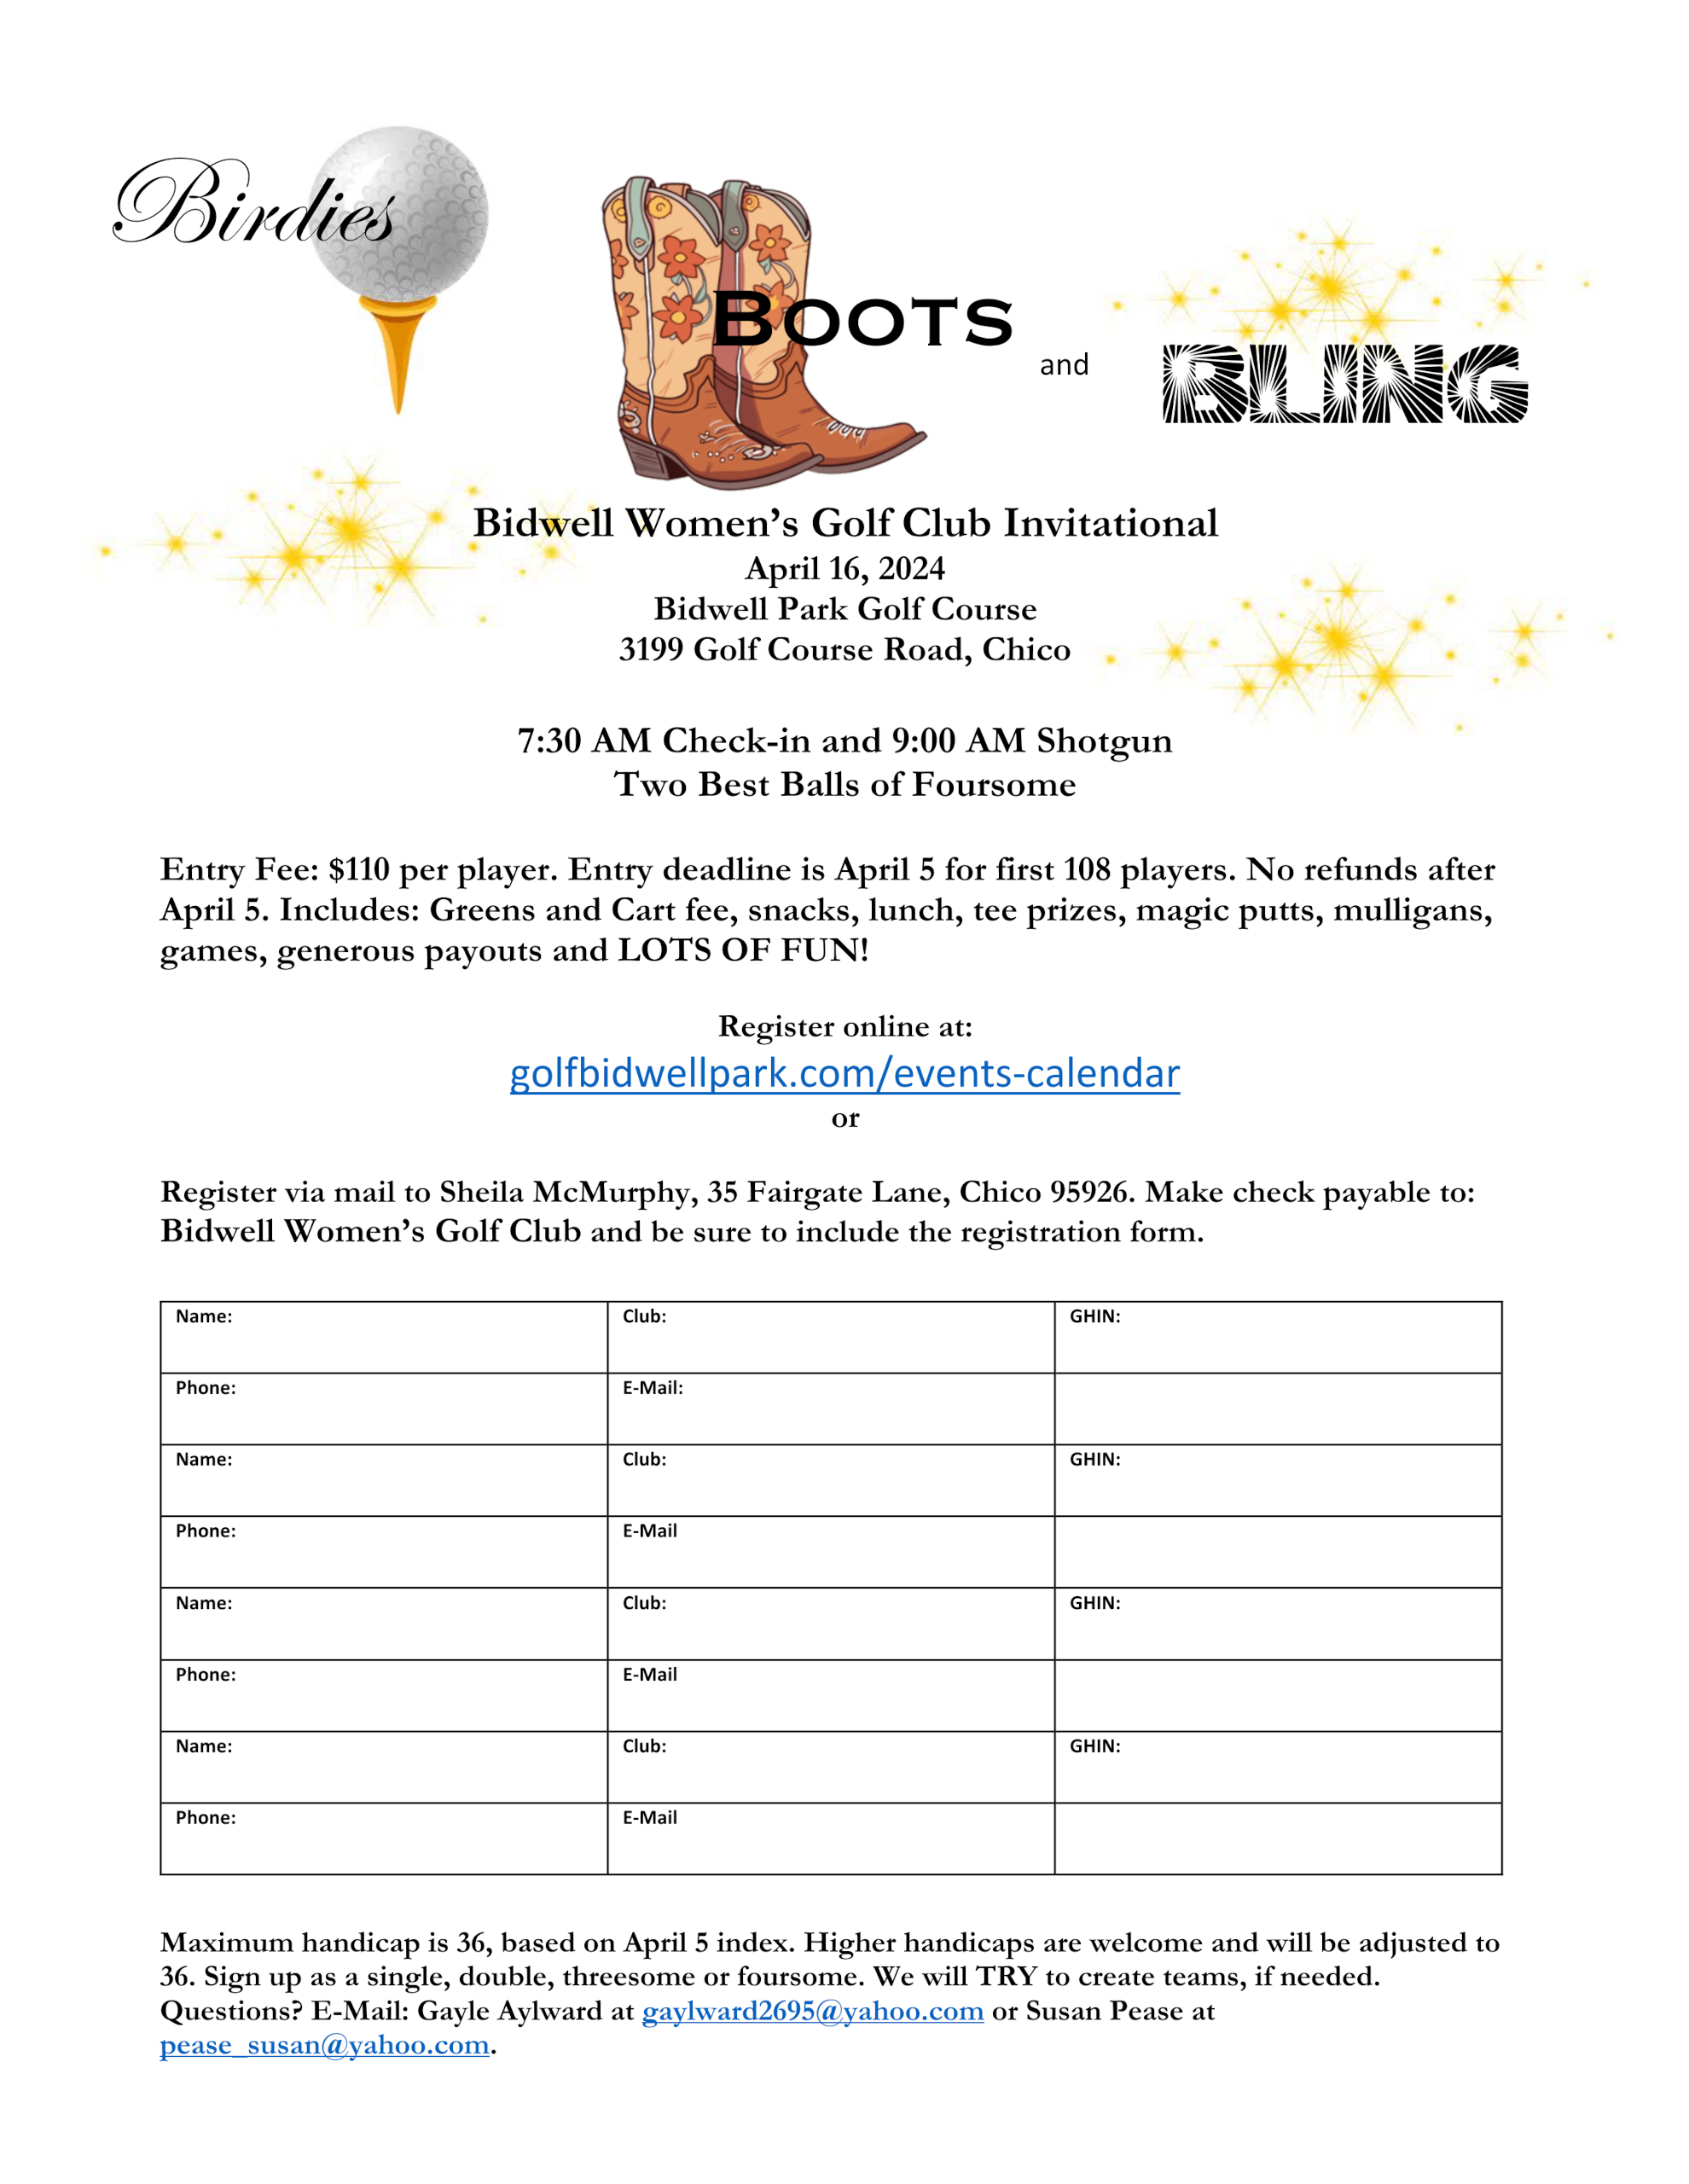 Bidwell Park Golf Course | Events At The Golf Course - (January 2024) Bidwell Park Golf Course Events At The Golf Course – (January 2024) BPGC (2024) BWGC Ladies Invitational 'Birdies, Boots, & Bling' Event (Flyer)